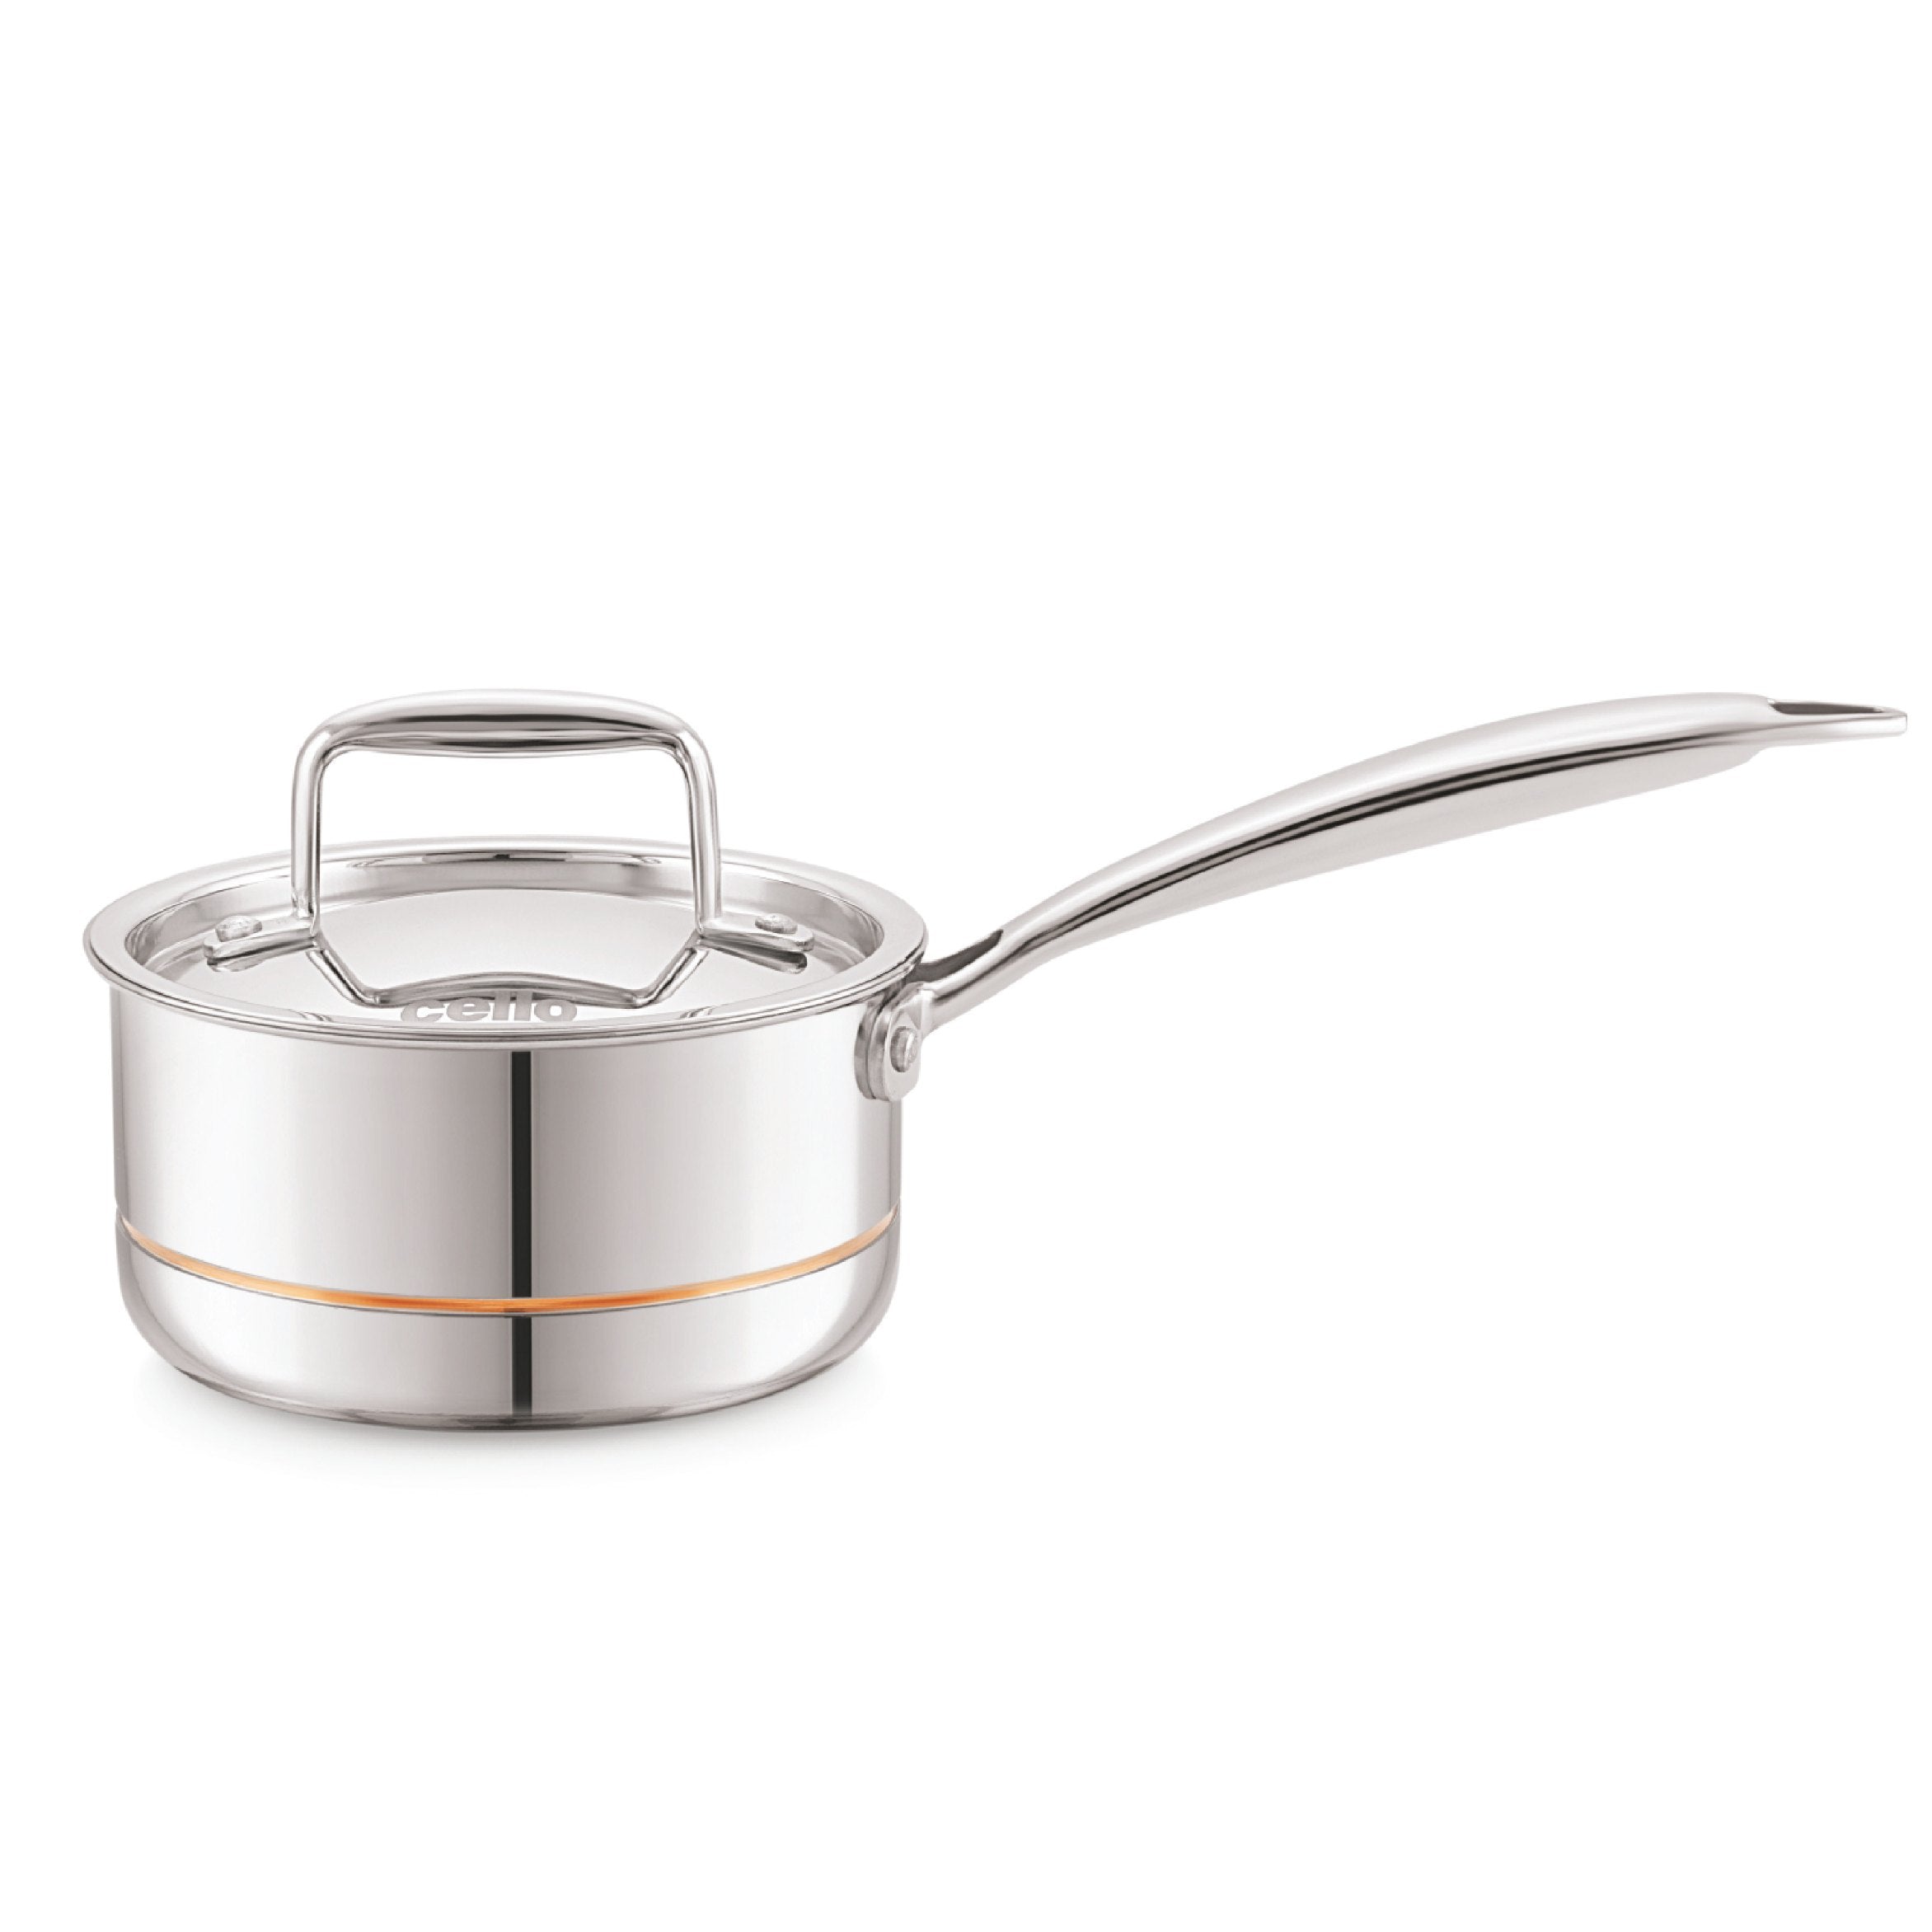 5-Ply Stainless Steel Sauce Pan with Lid Silver / 1.4 Litres